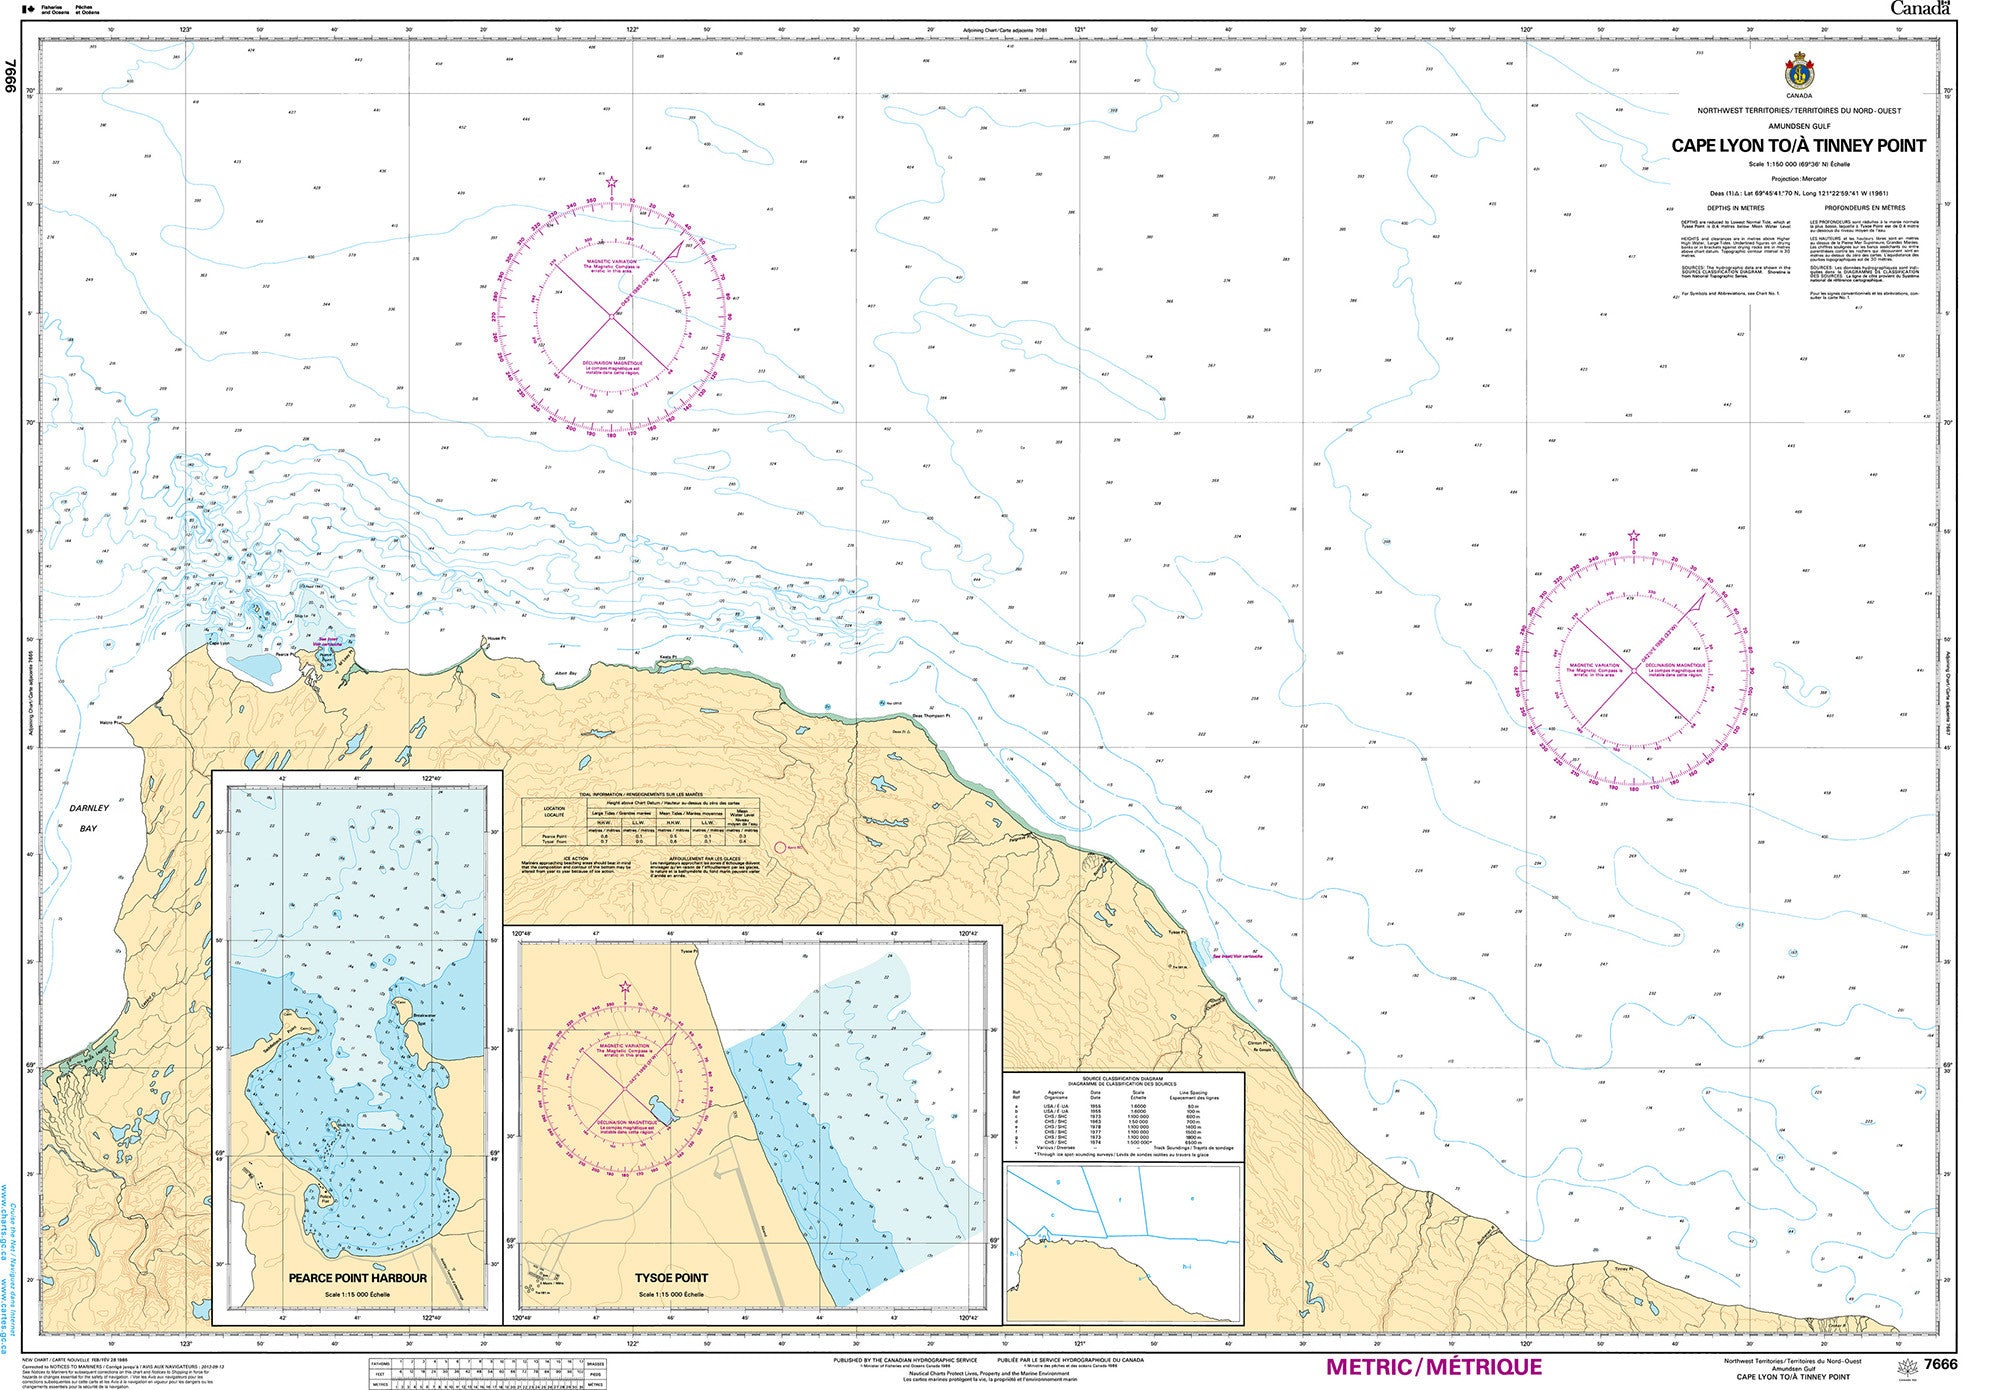 Canadian Hydrographic Service Nautical Chart CHS7666: Cape Lyon to/à Tinney Point